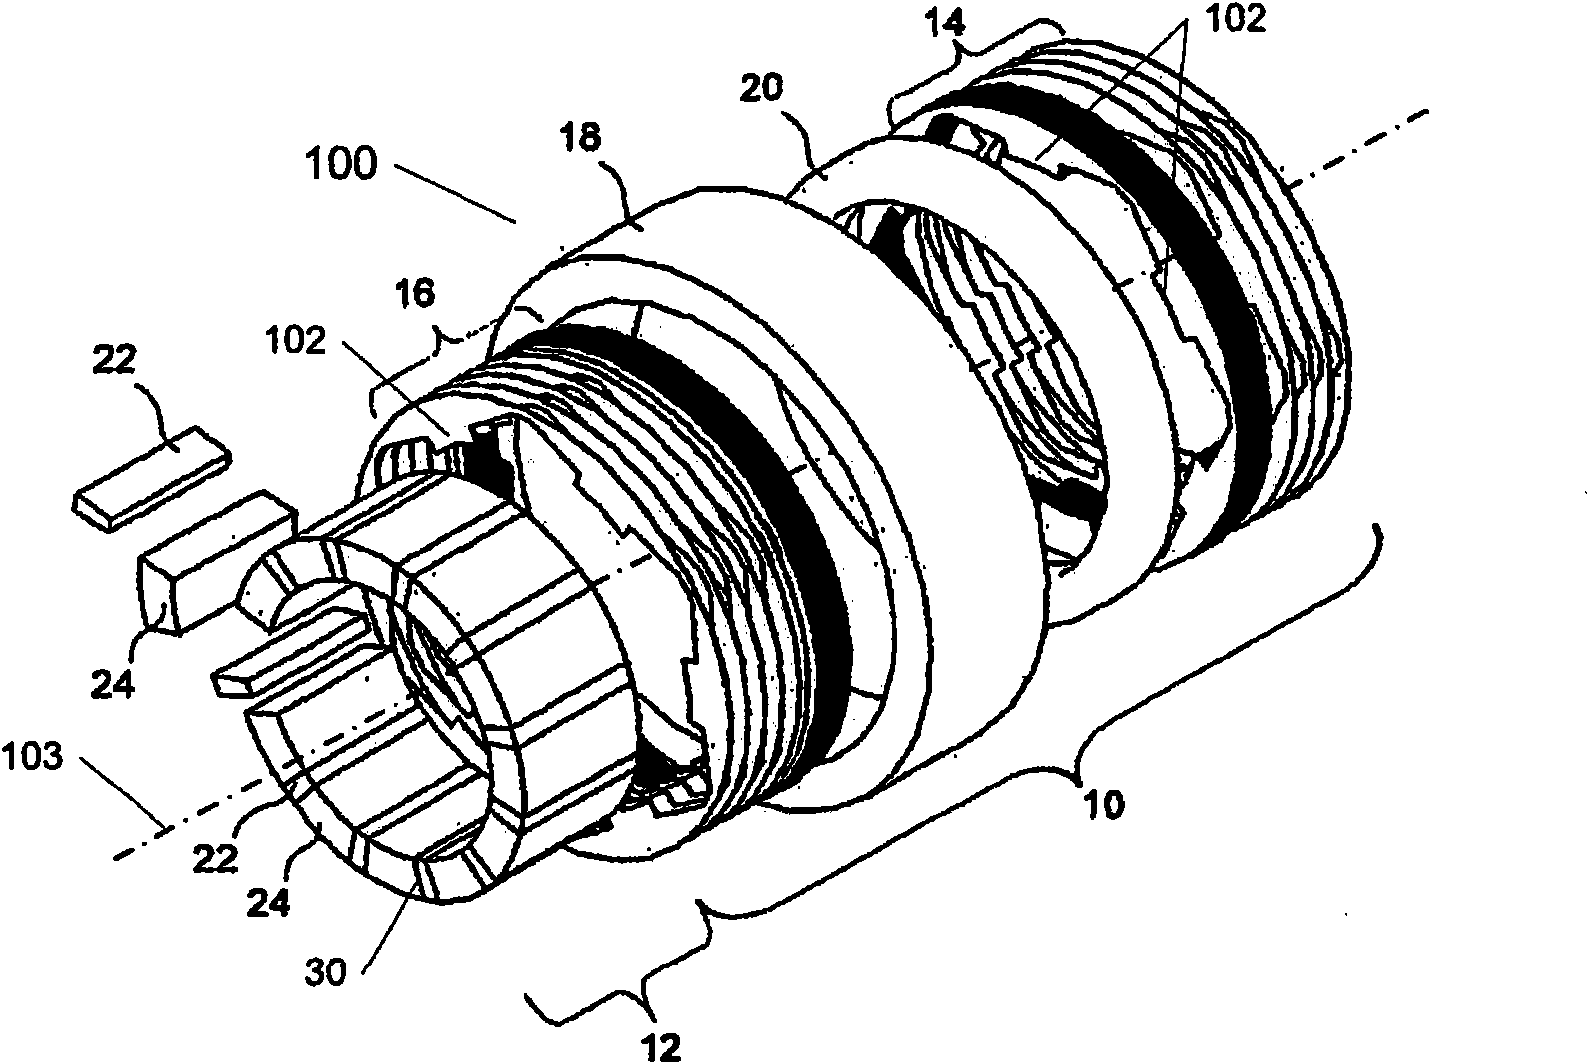 Permanent magnet rotor with flux concentrating pole pieces